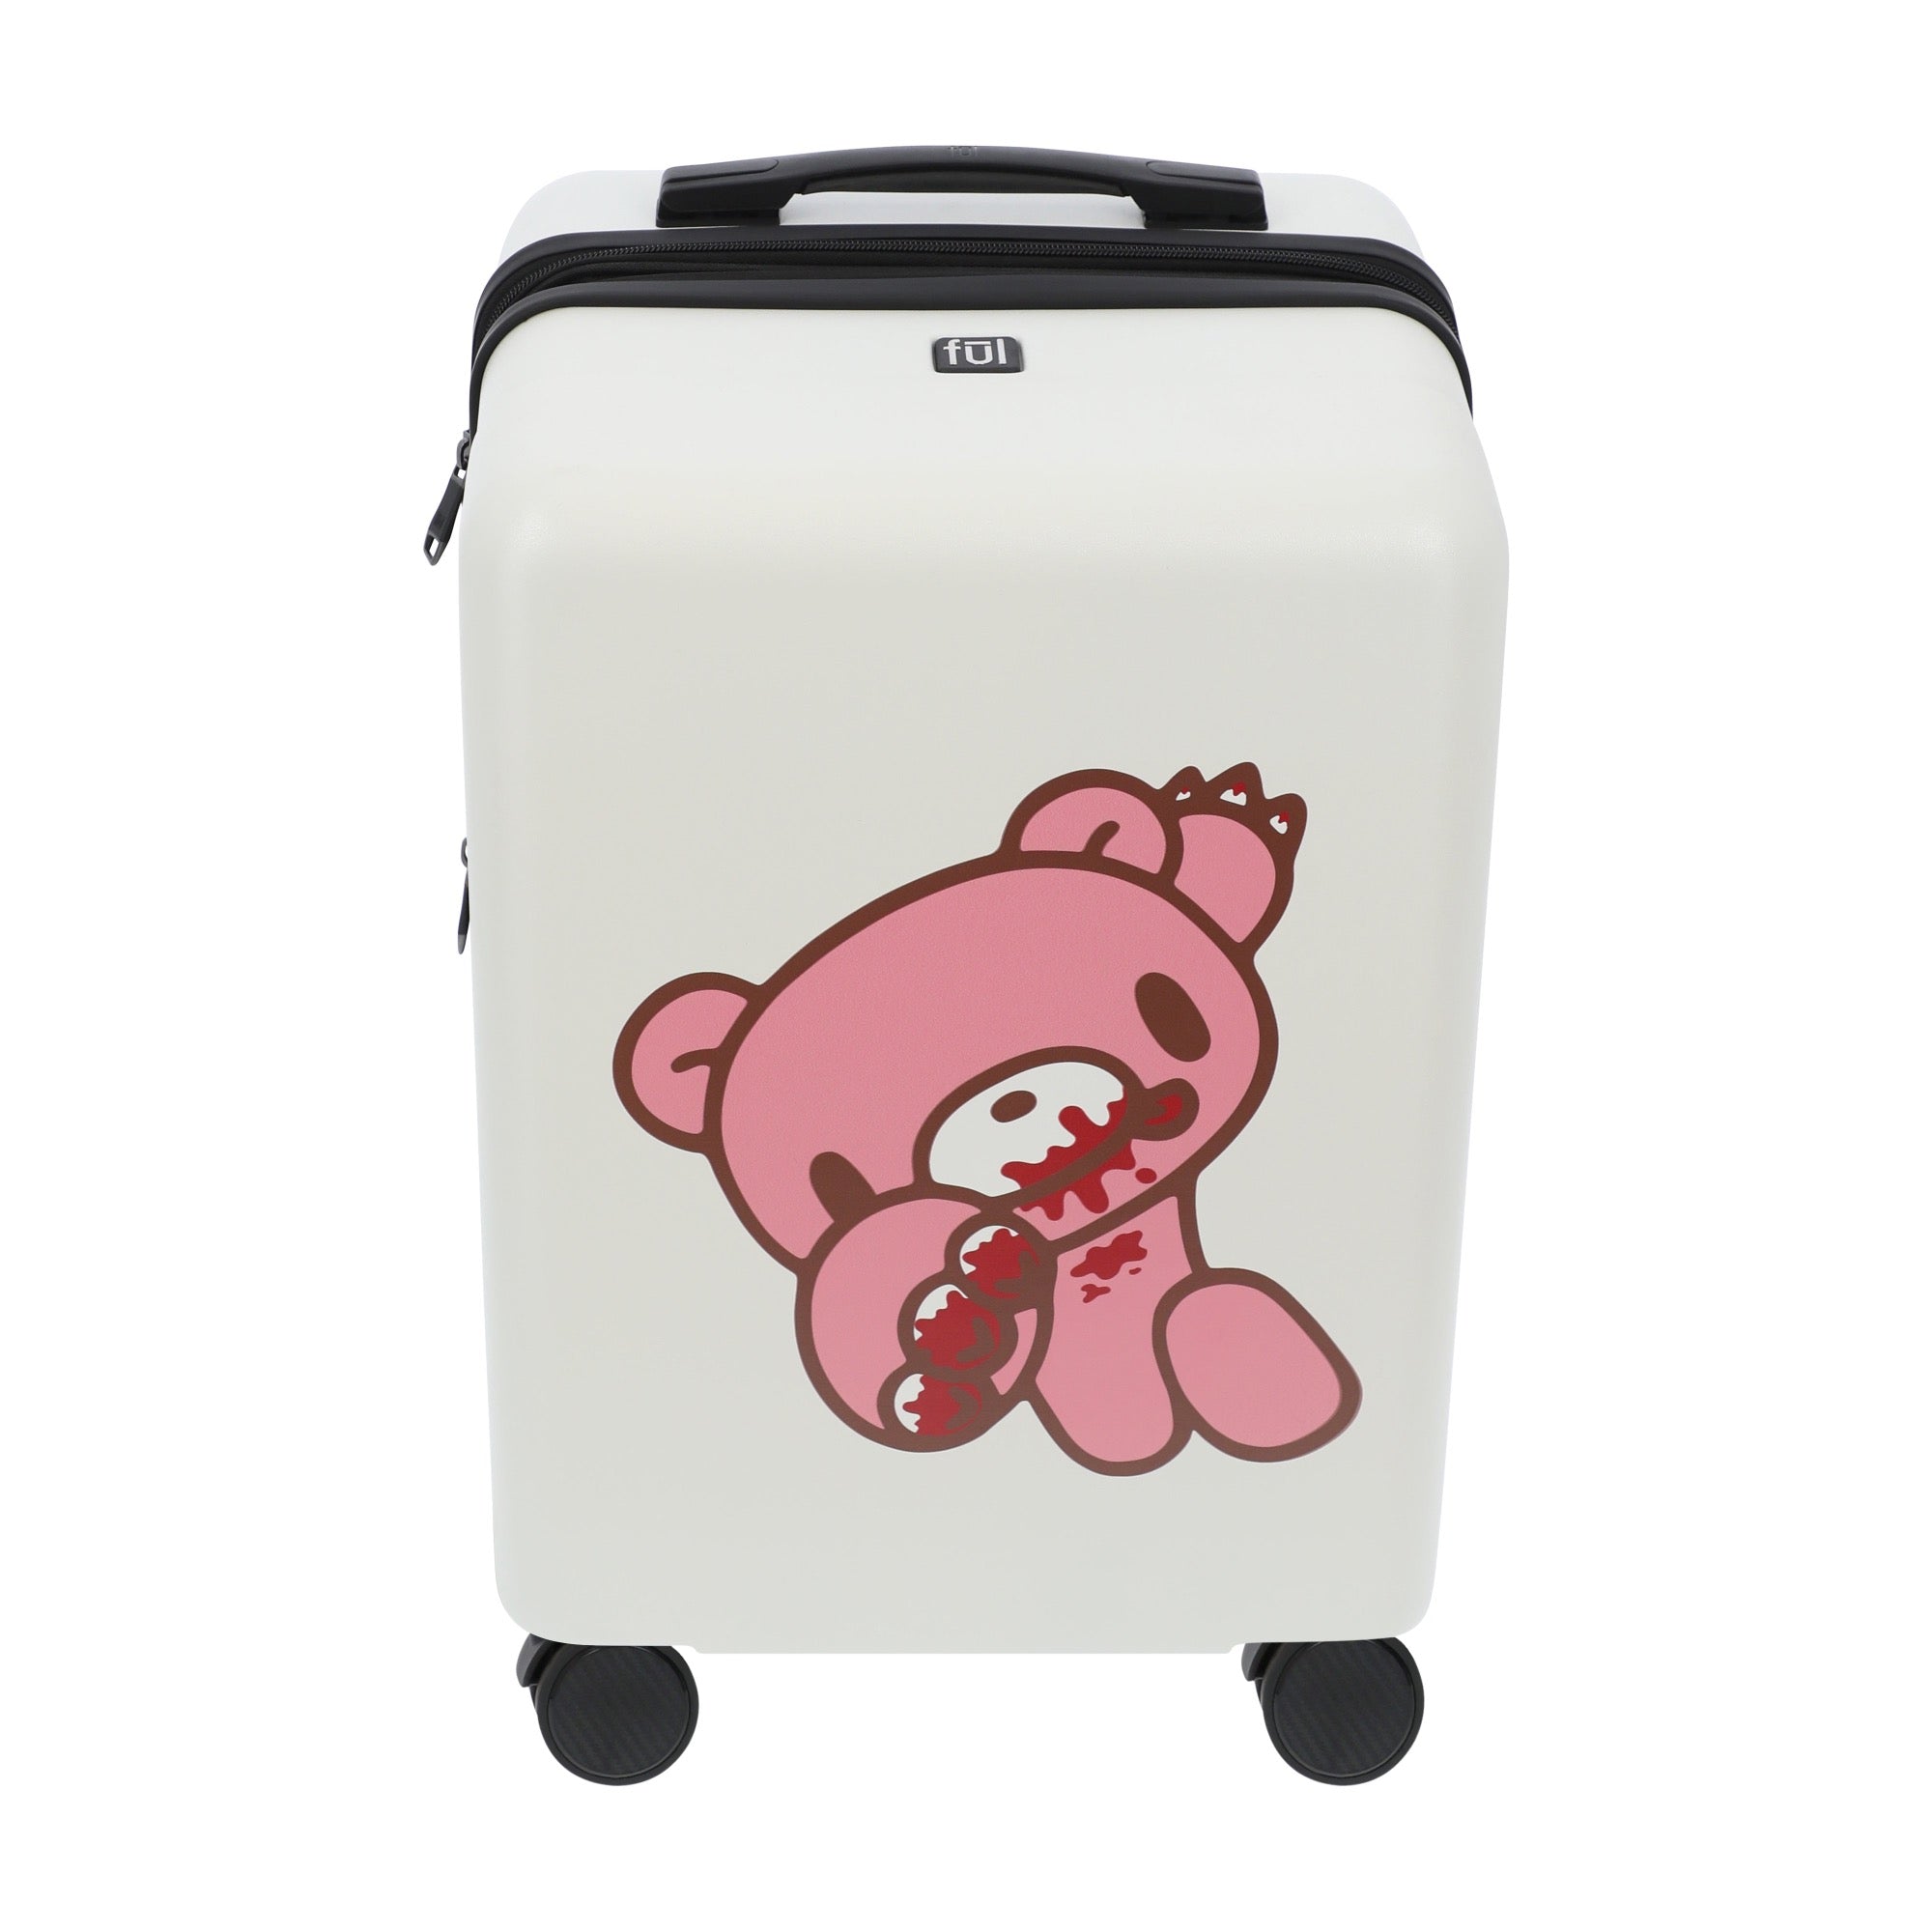 White octas gloomy bear 22.5" carry-on spinner suitcase luggage by Ful